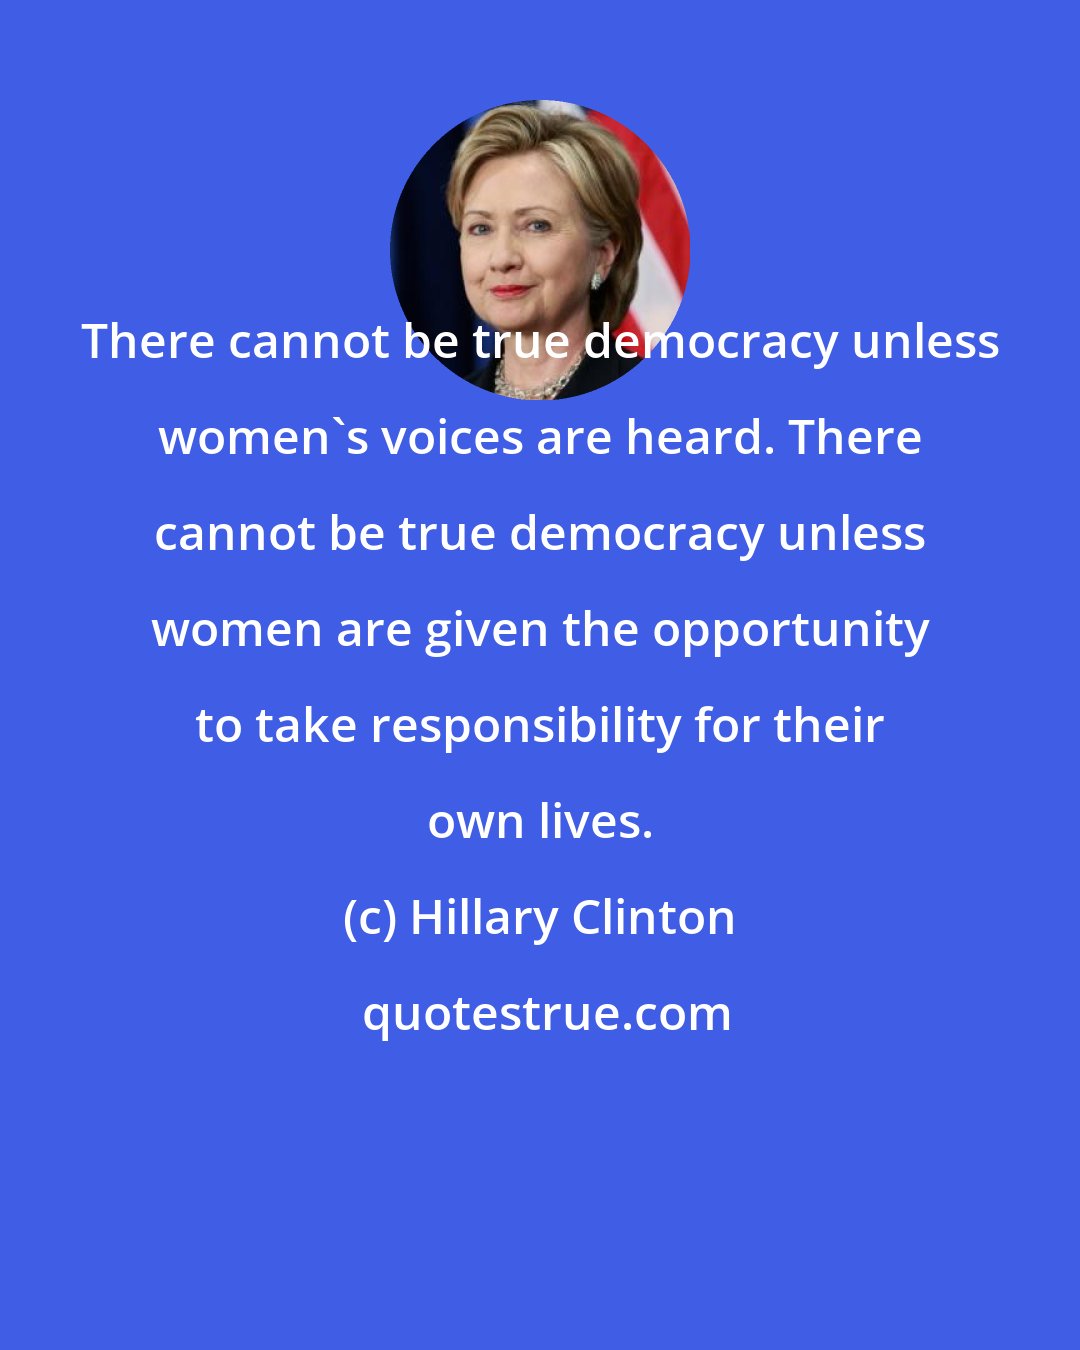 Hillary Clinton: There cannot be true democracy unless women's voices are heard. There cannot be true democracy unless women are given the opportunity to take responsibility for their own lives.